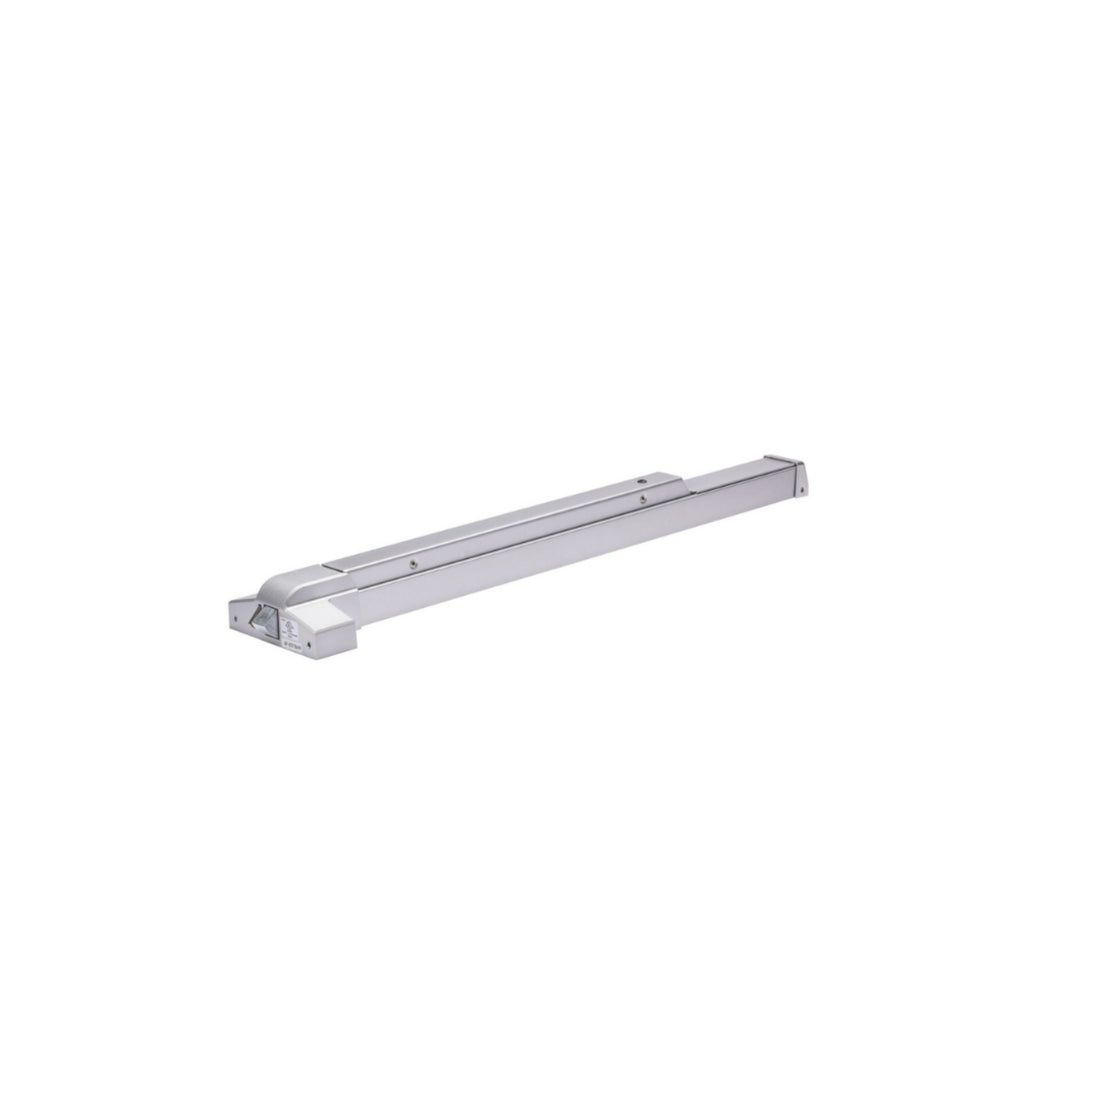 EDTBAR Series Grade 2 Commercial 36 in Fire Rated Rim Touch Bar Exit Device